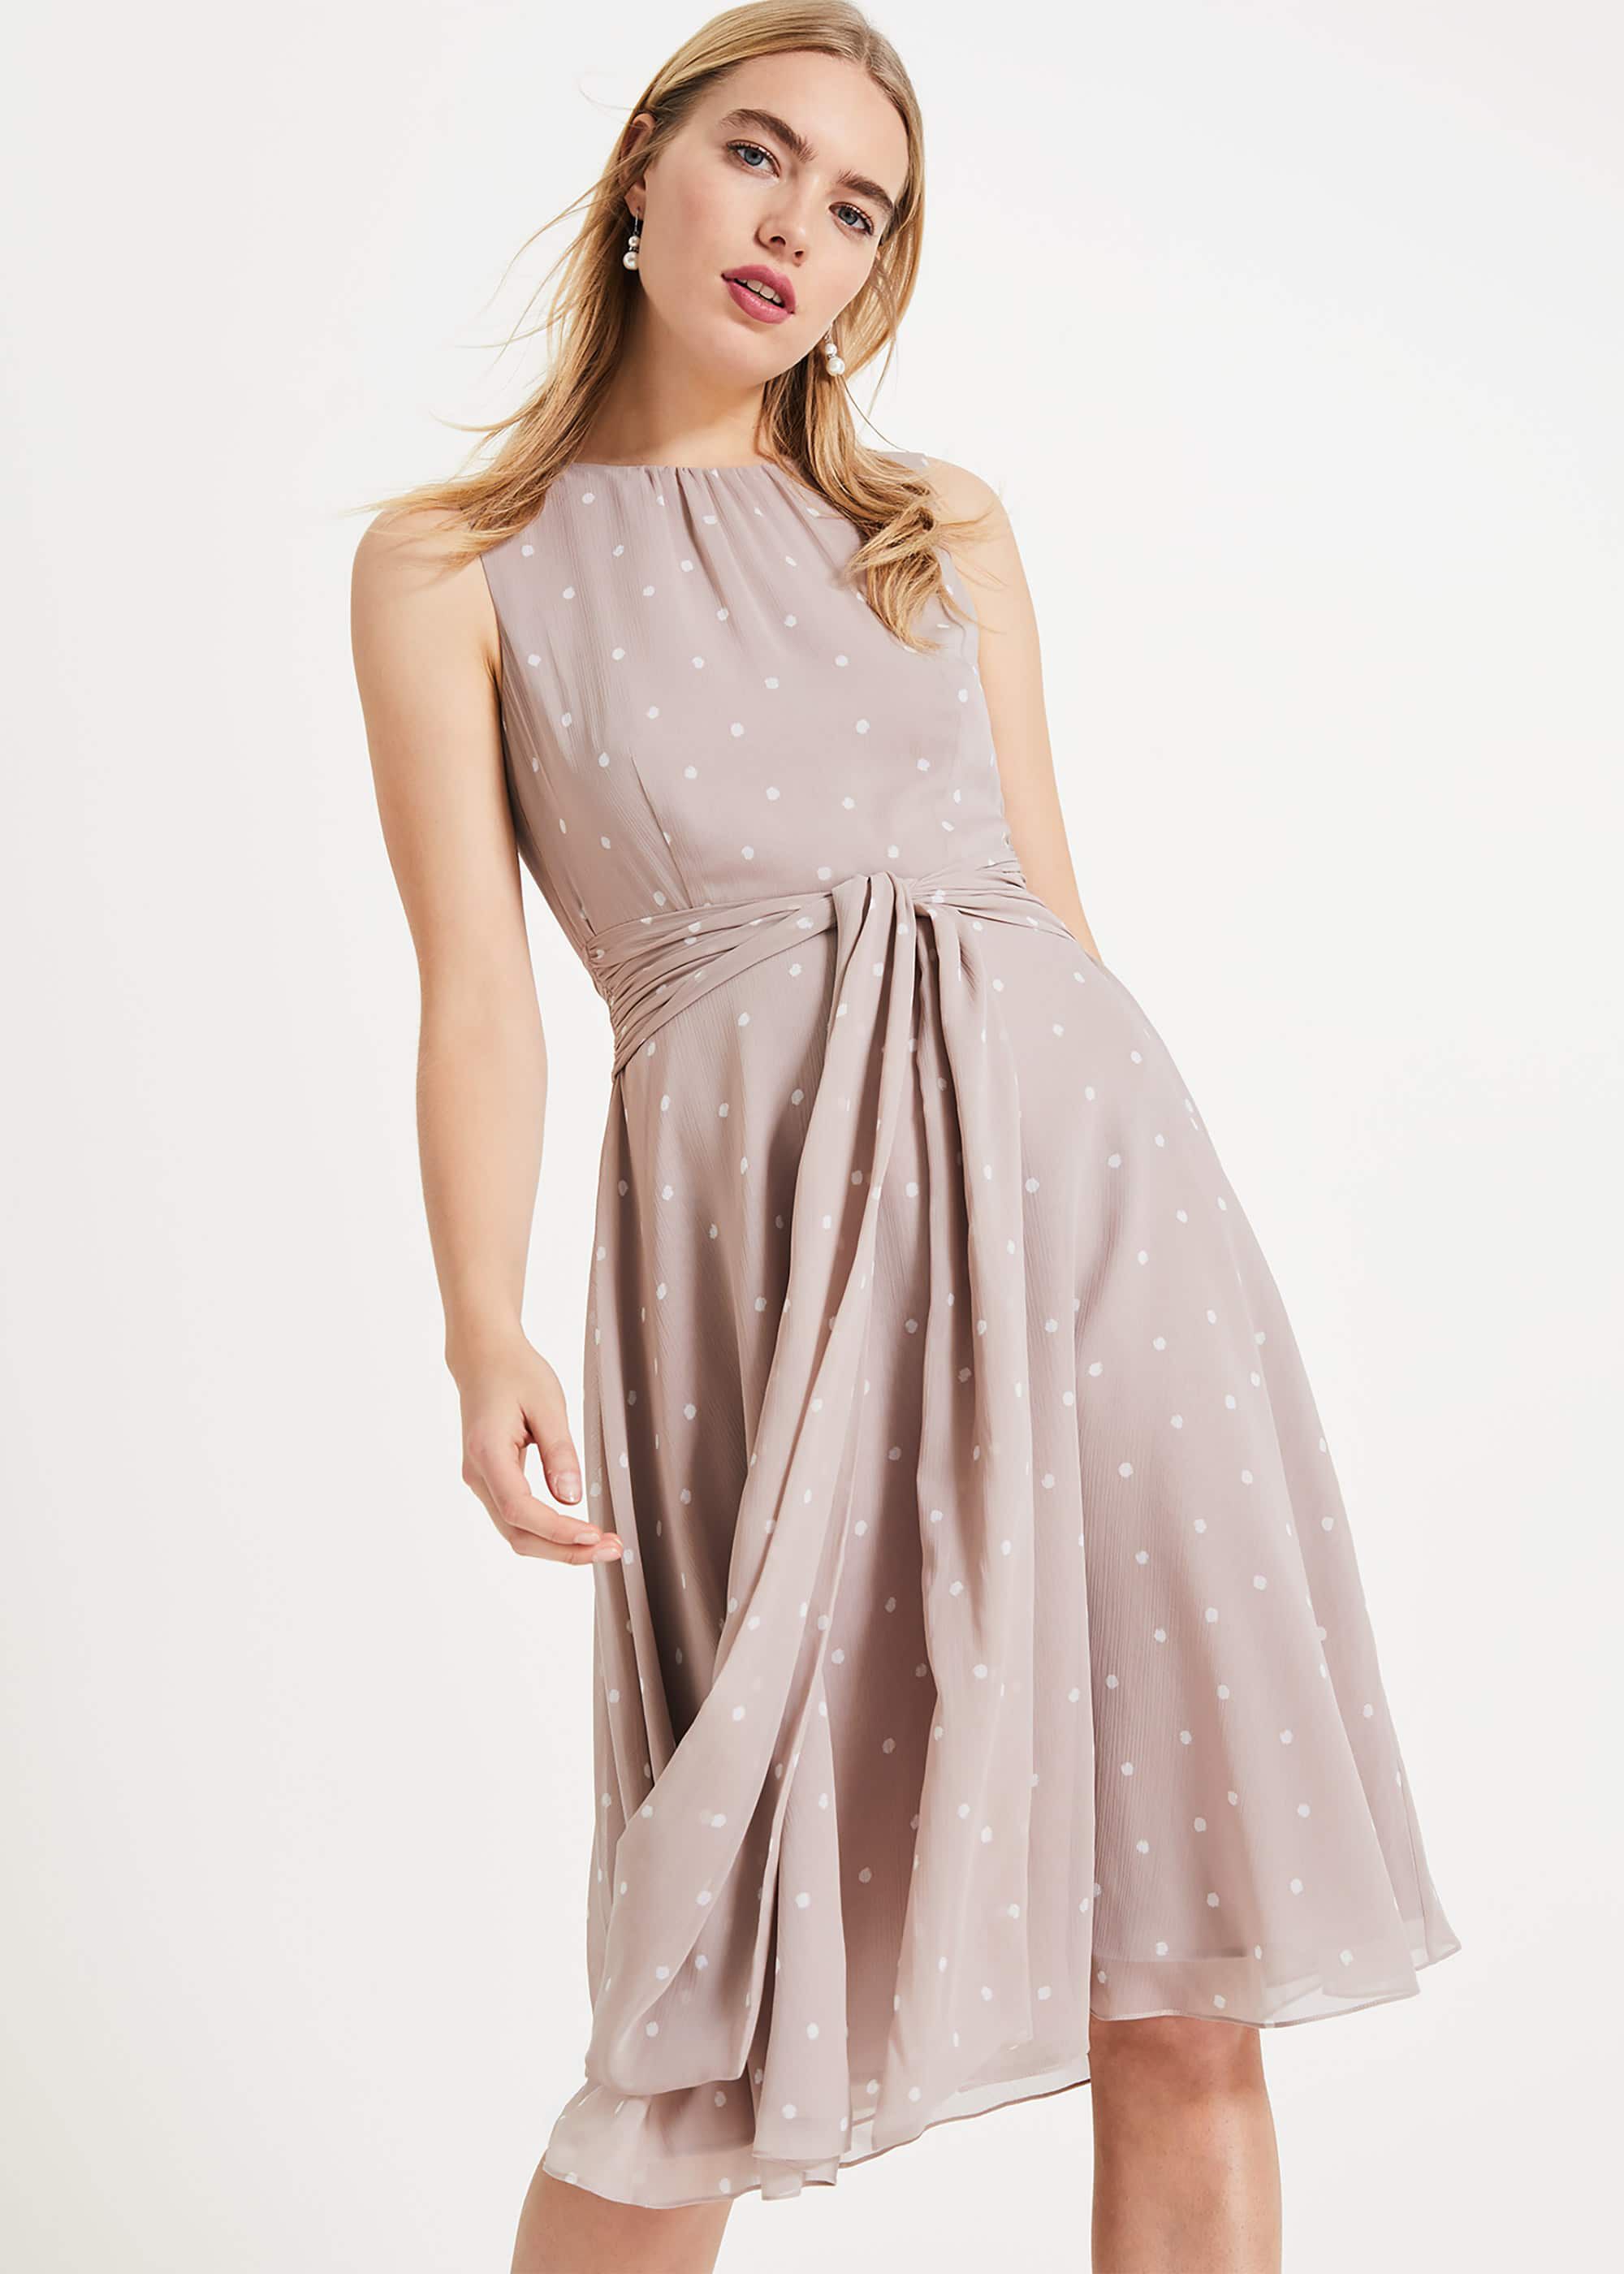 bridesmaid dress for big arms and tummy